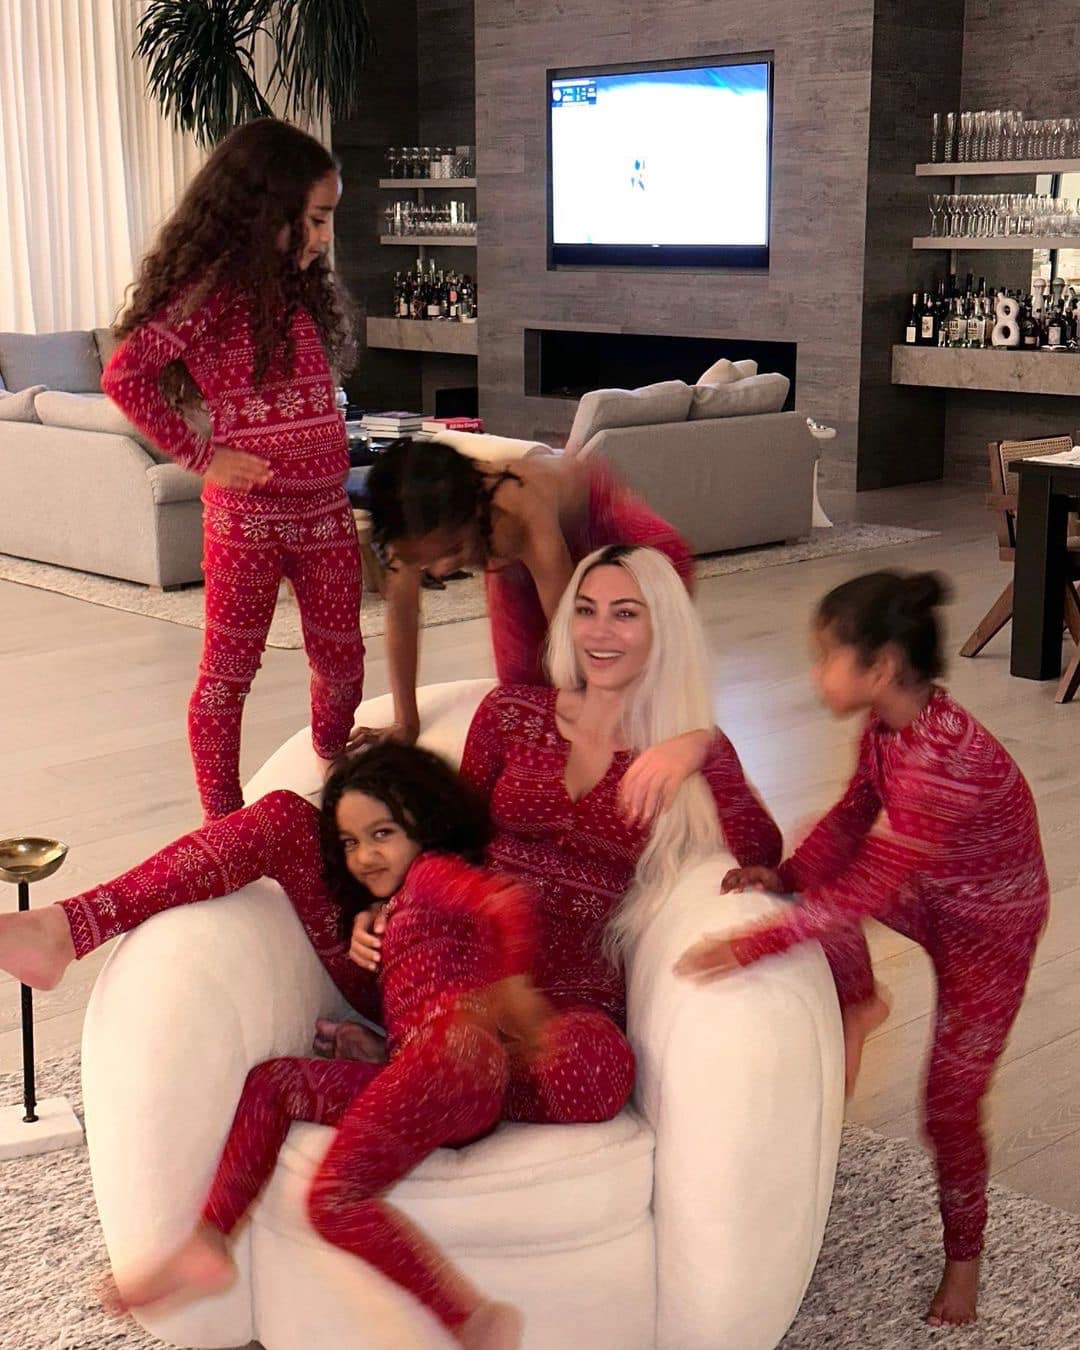 likhoa kim kardashian surprisingly shared moments spent with her precious little angles including chicago north palm and saint on sunday night 653e8376aa082 Kim Kardashian Surprisingly Shared Moments Spent With Her Precious Little Angles Including Chicago, North, Palm And Saint On Sunday Night